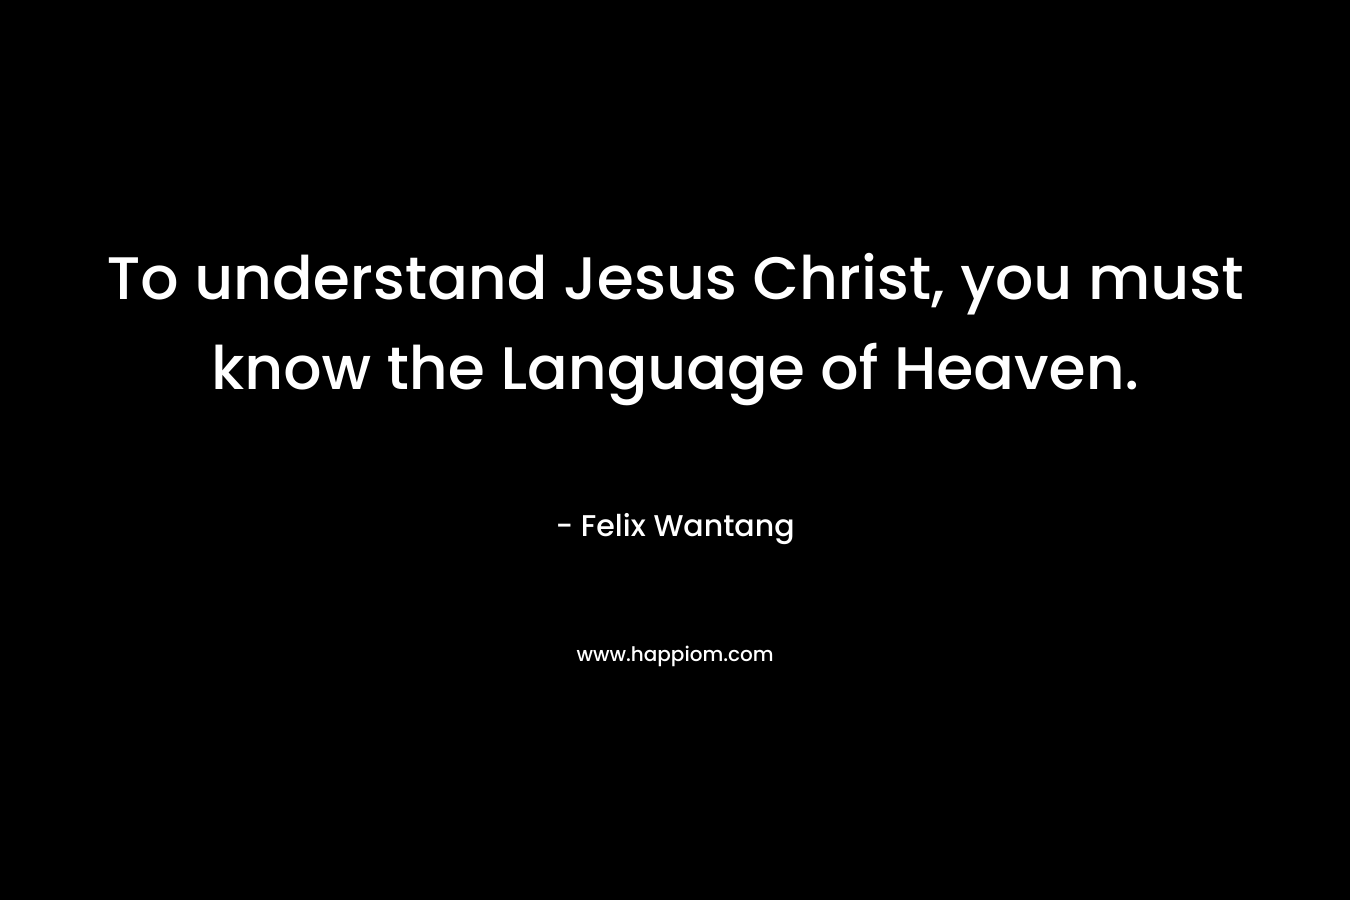 To understand Jesus Christ, you must know the Language of Heaven.